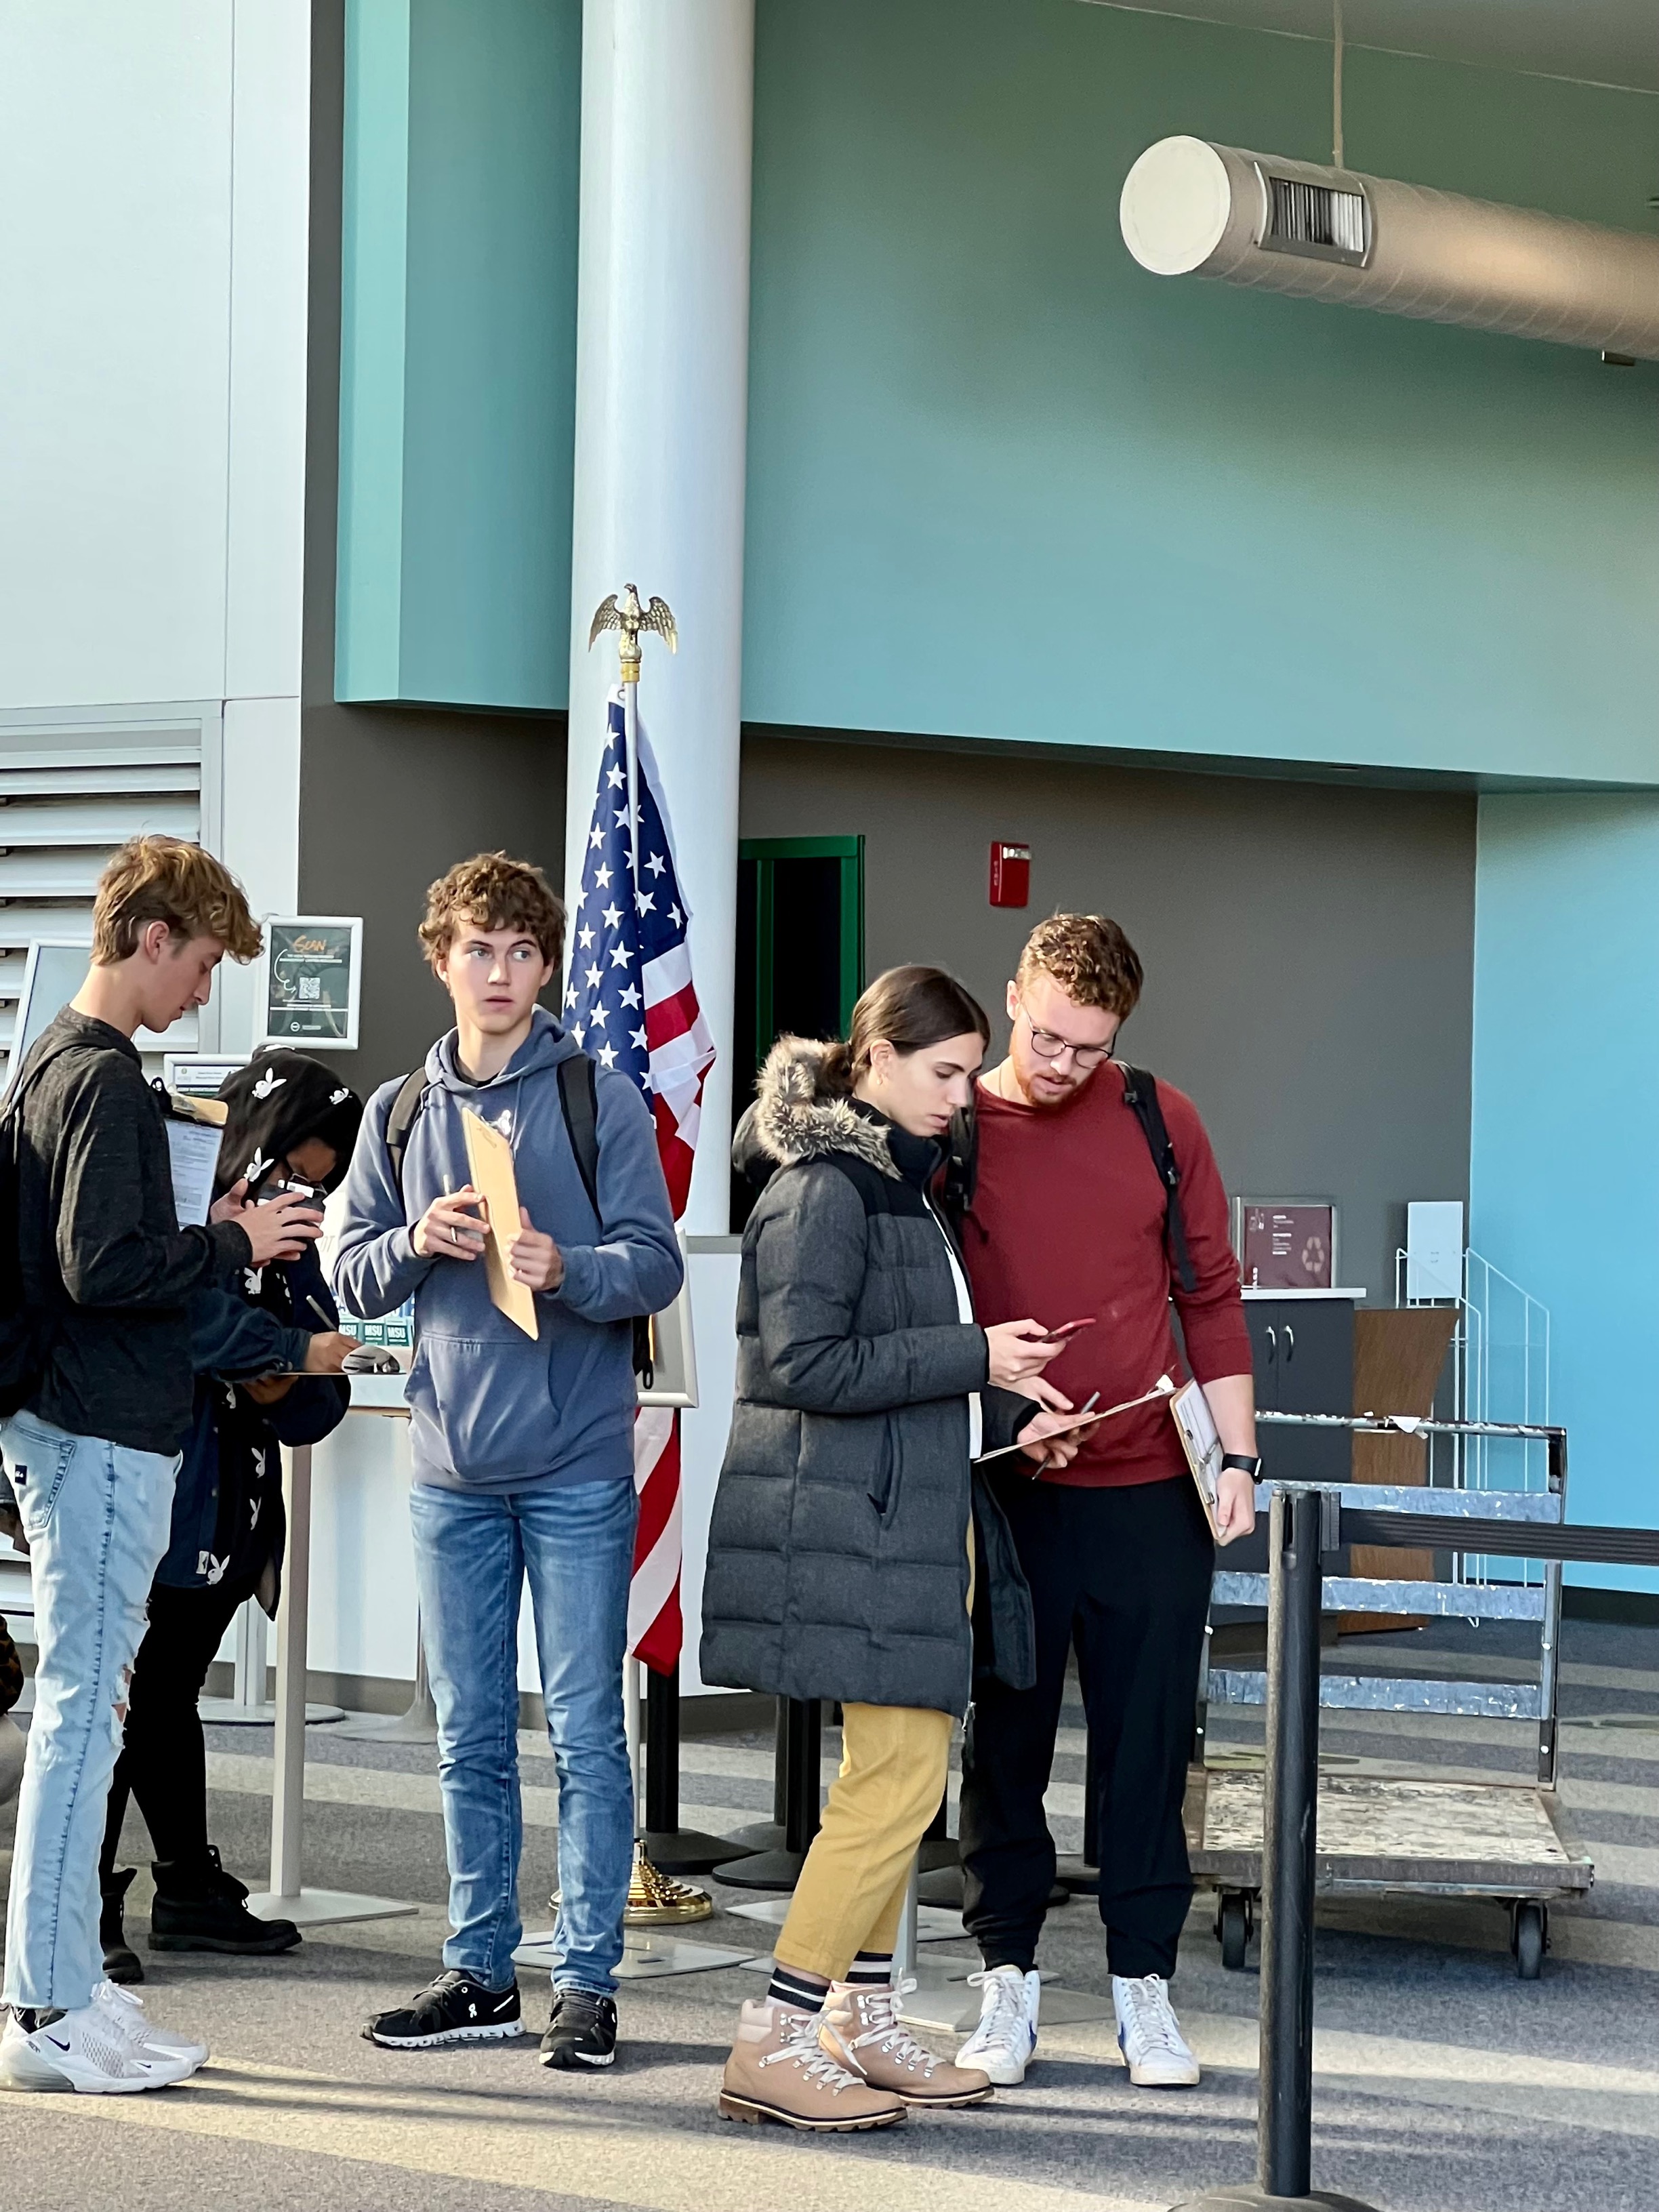 Four students waiting in line to vote in the 2022 midterm elections with an American flag in the background.